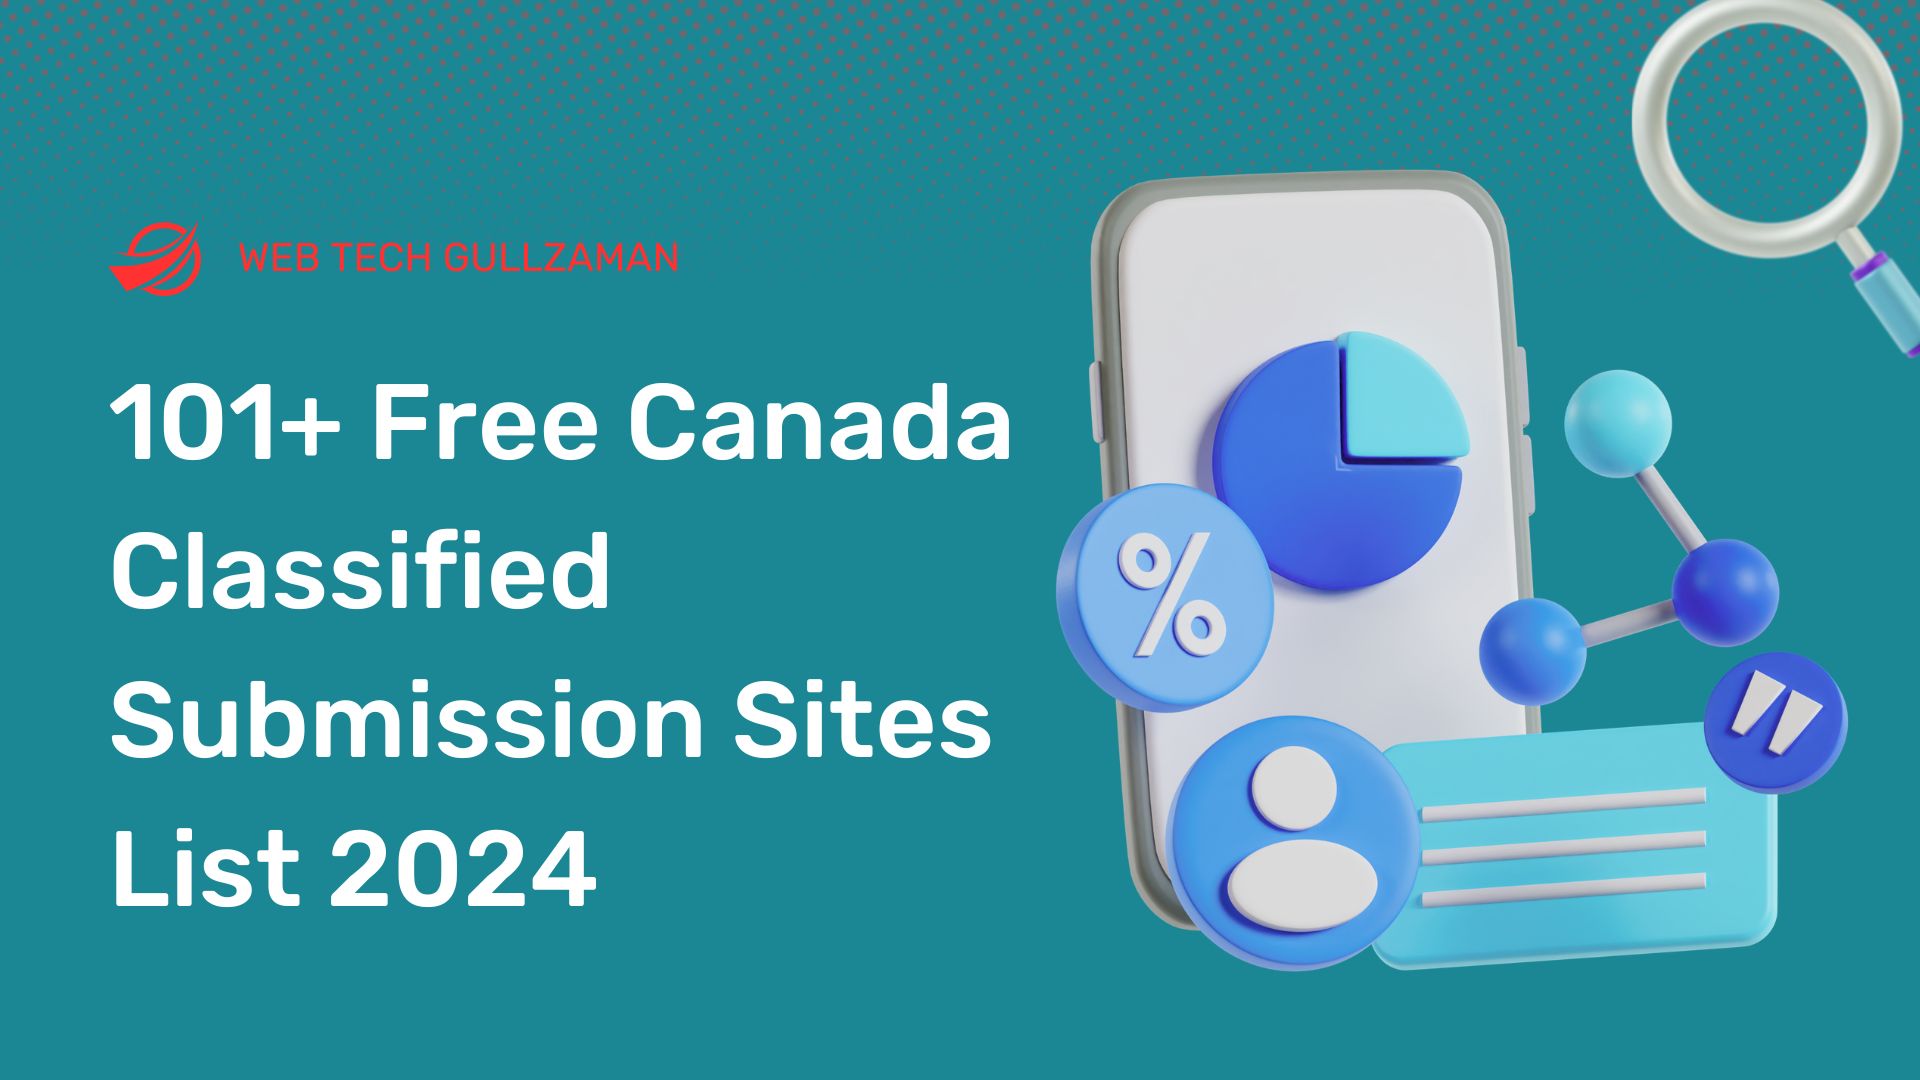 101+ Free Canada Classified Submission Sites List 2024